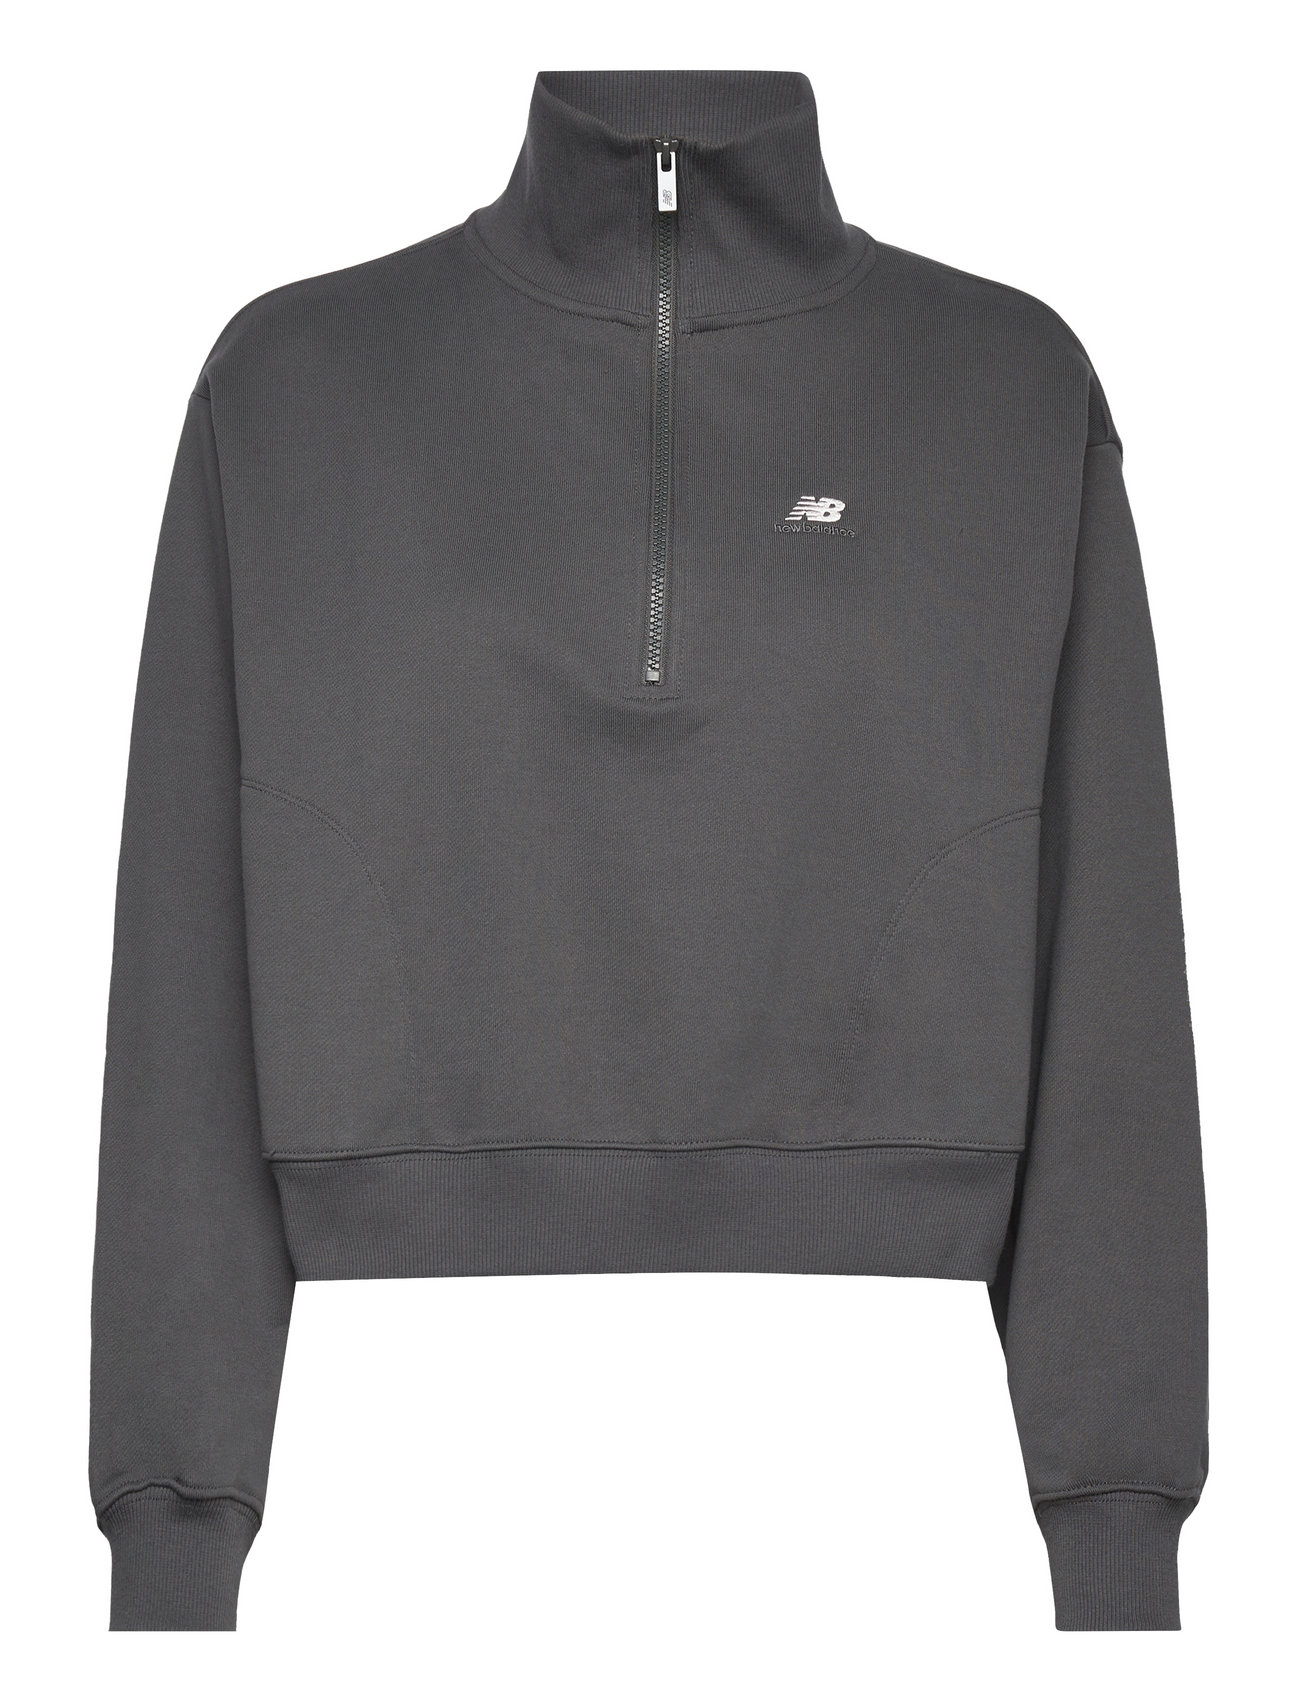 New Balance Women's Athletics Remastered French Terry 1/4 Zip - Black (Size S)